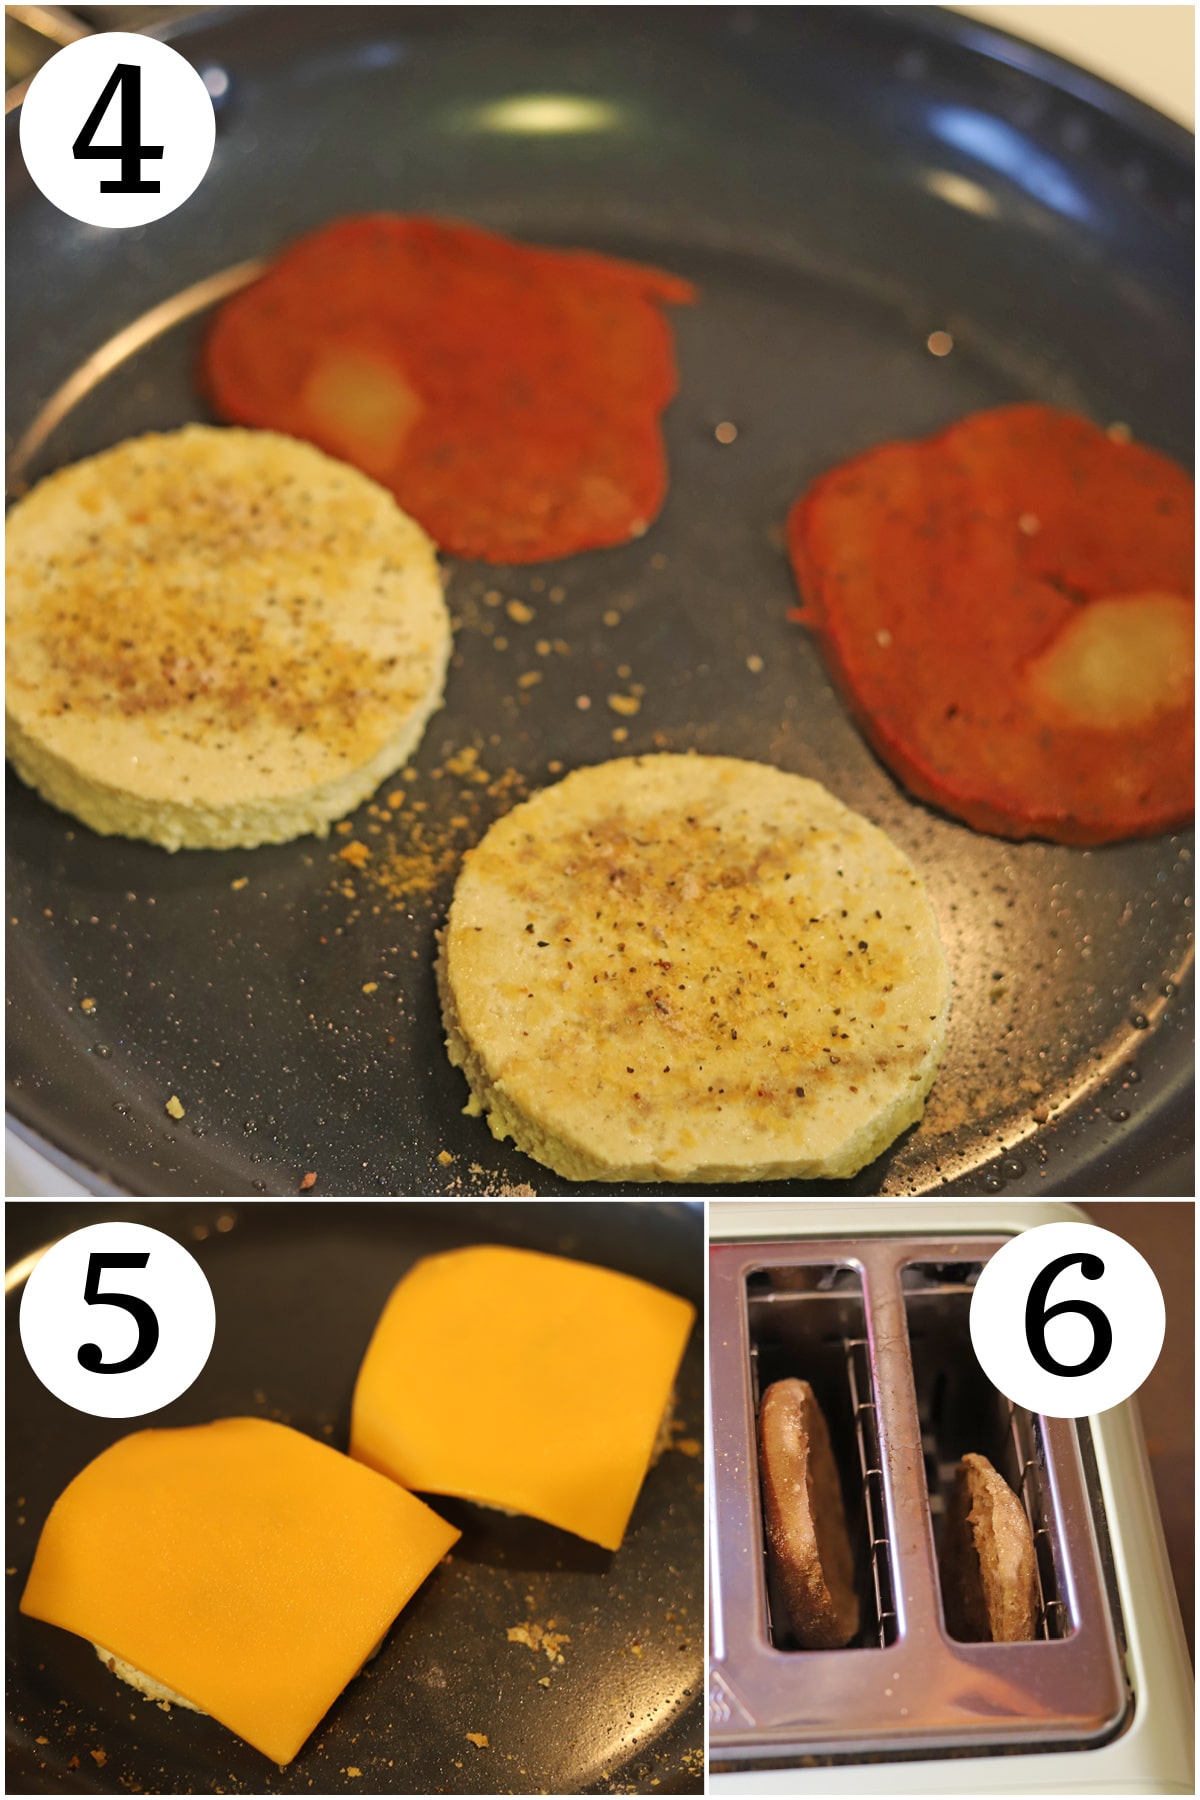 Numbered collage showing how to cook vegan egg mcmuffin.